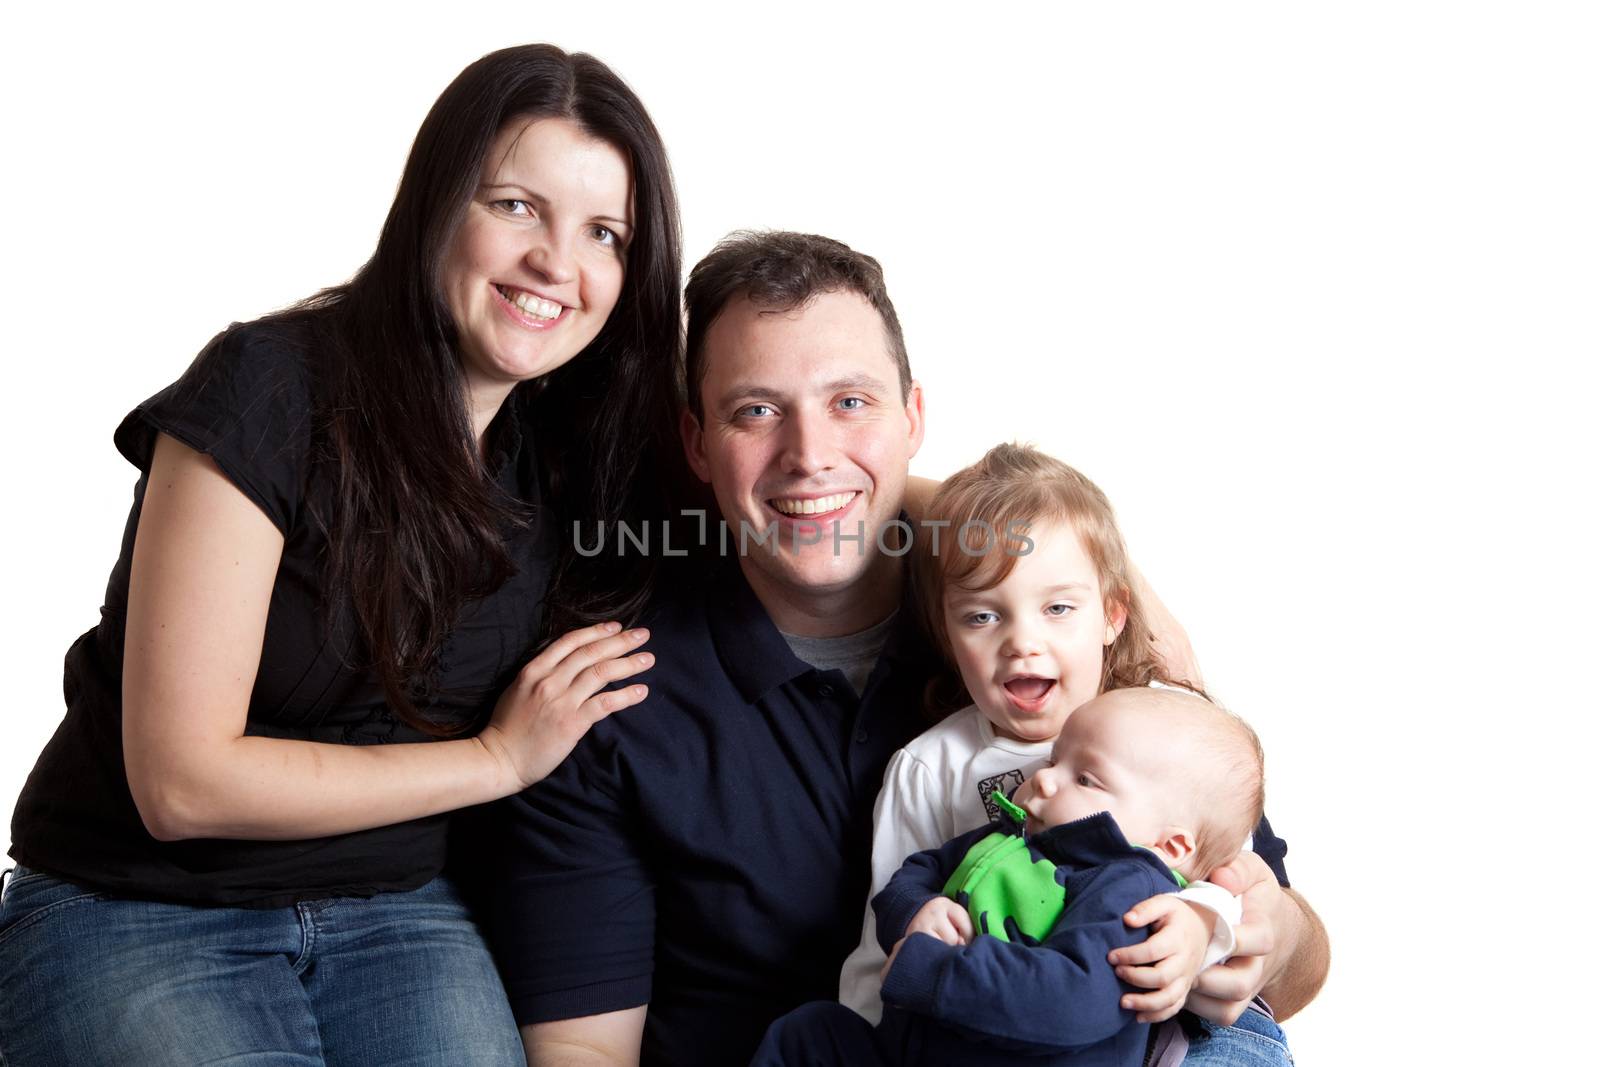 A young happy and healthy family isolated over white holding their newborn baby boy and toddler age daughter.